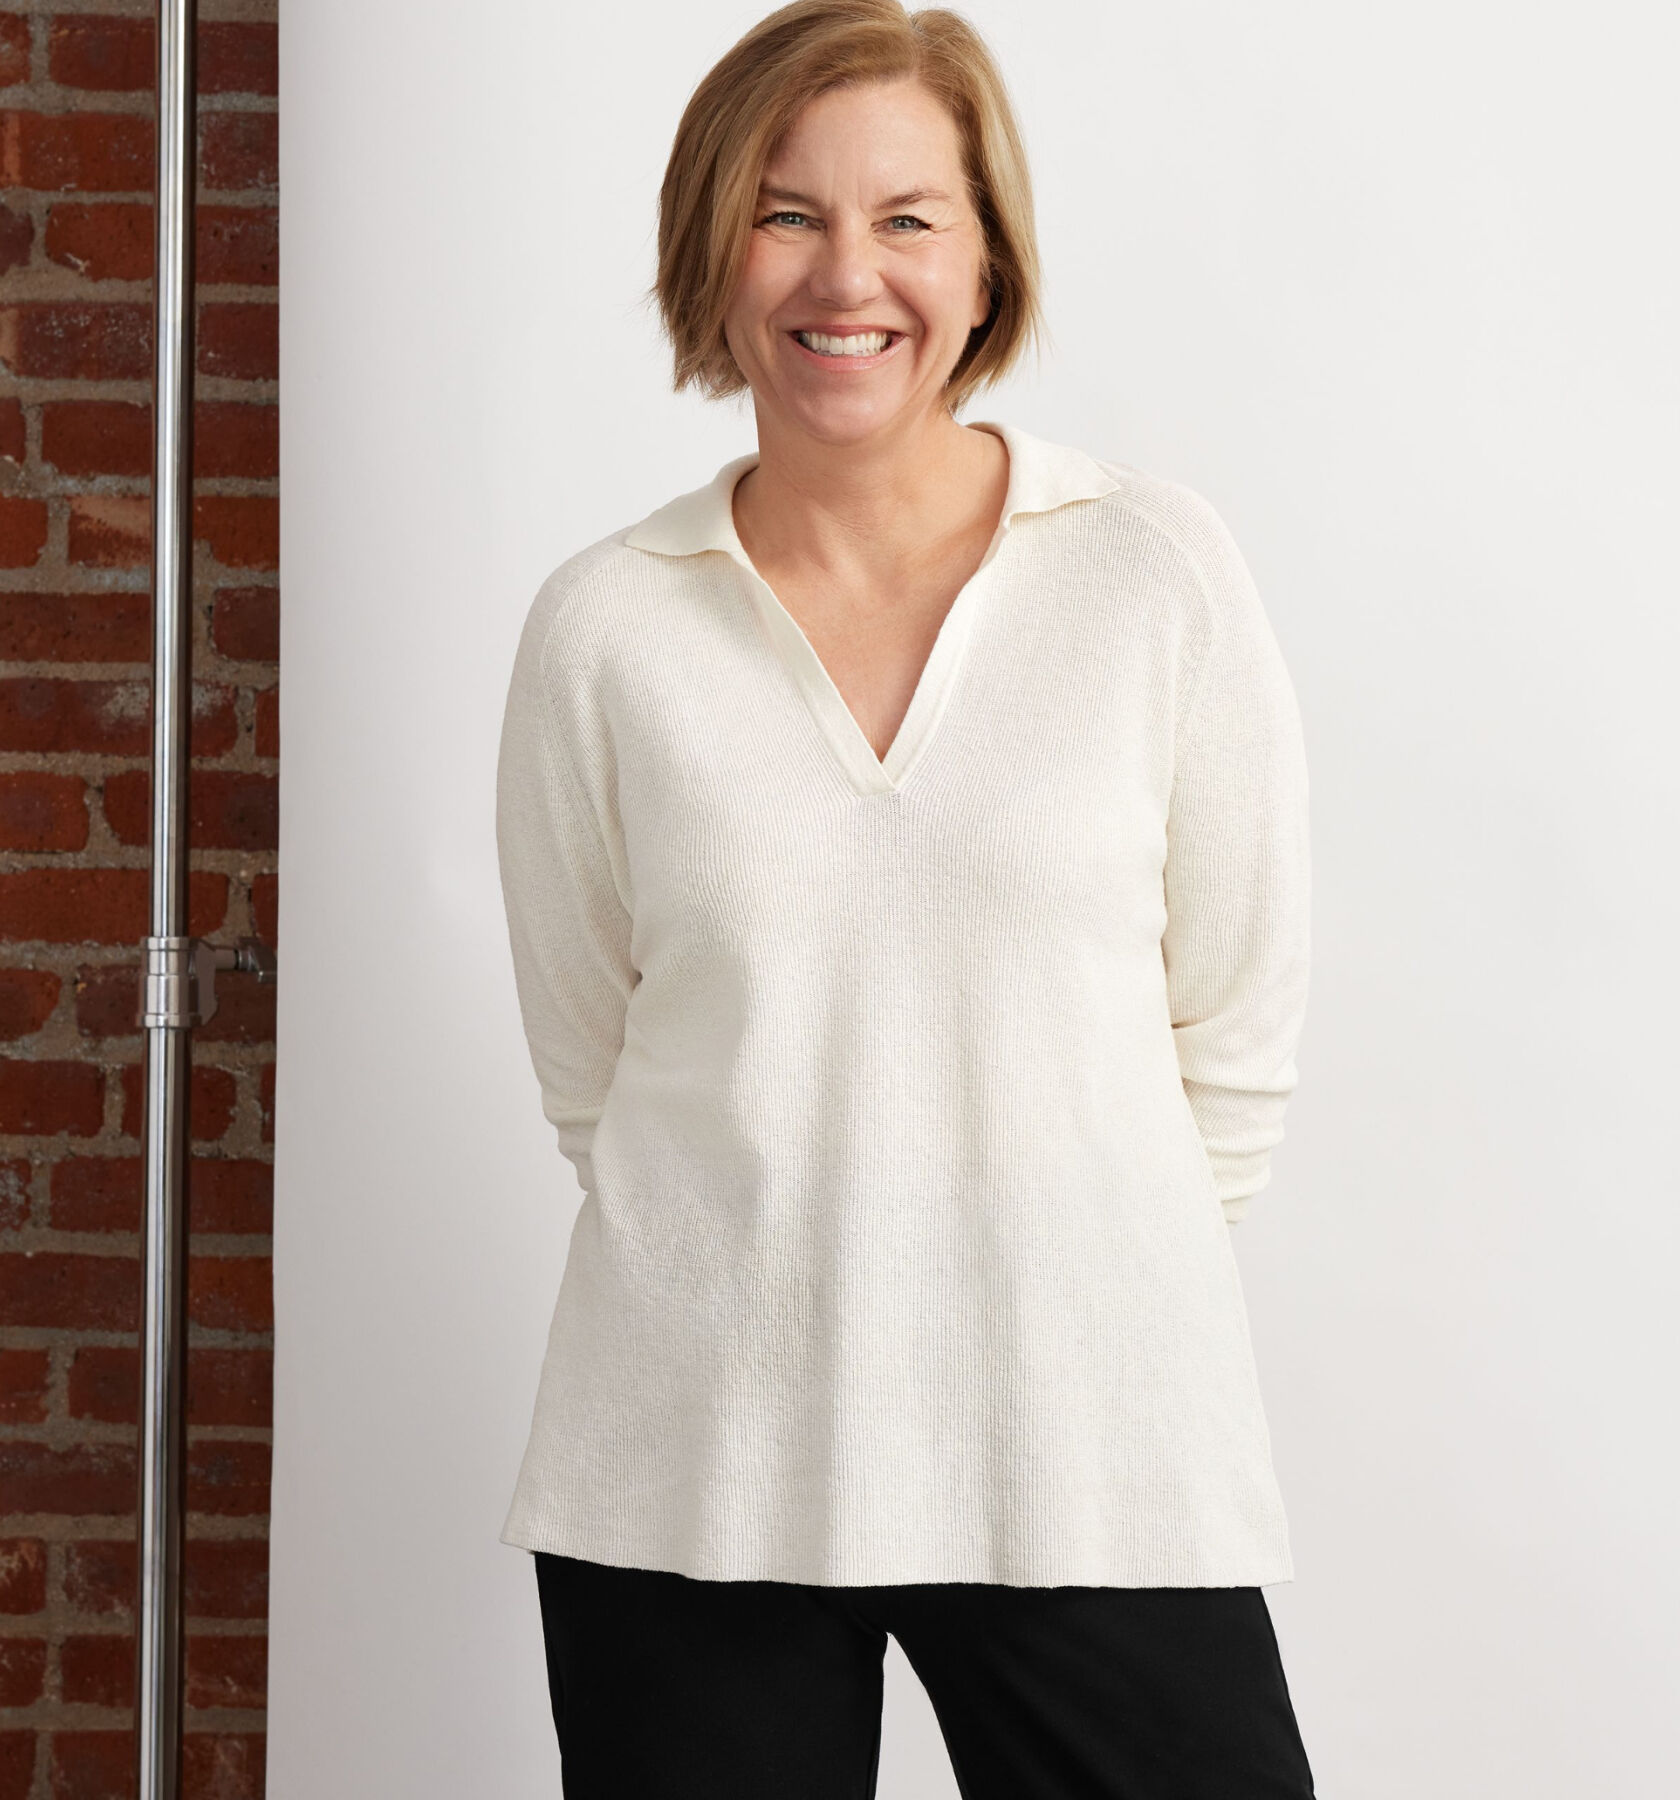 Lisa Williams, EILEEN FISHER CEO wearing white top.